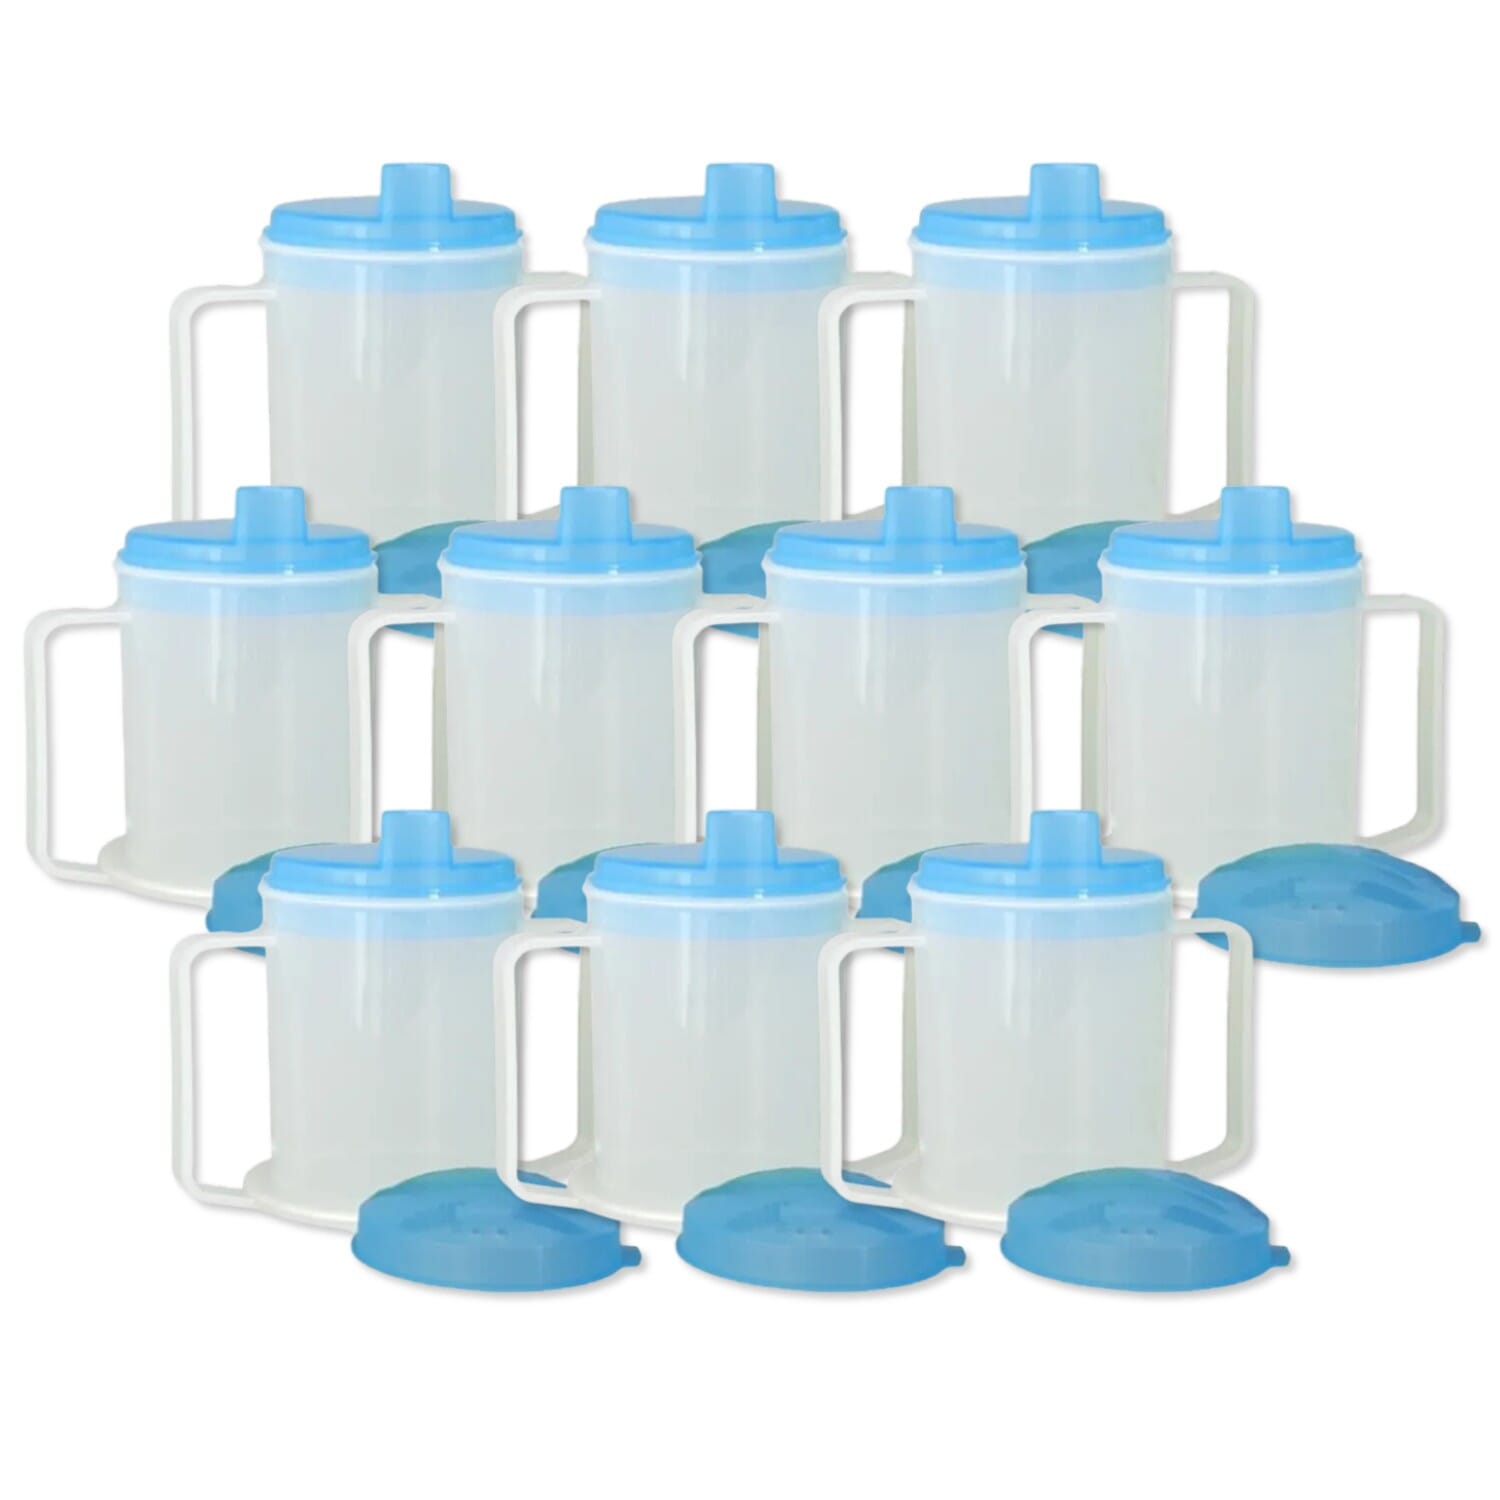 View Easy Sip Adult Drinking Cup Pack of 10 information